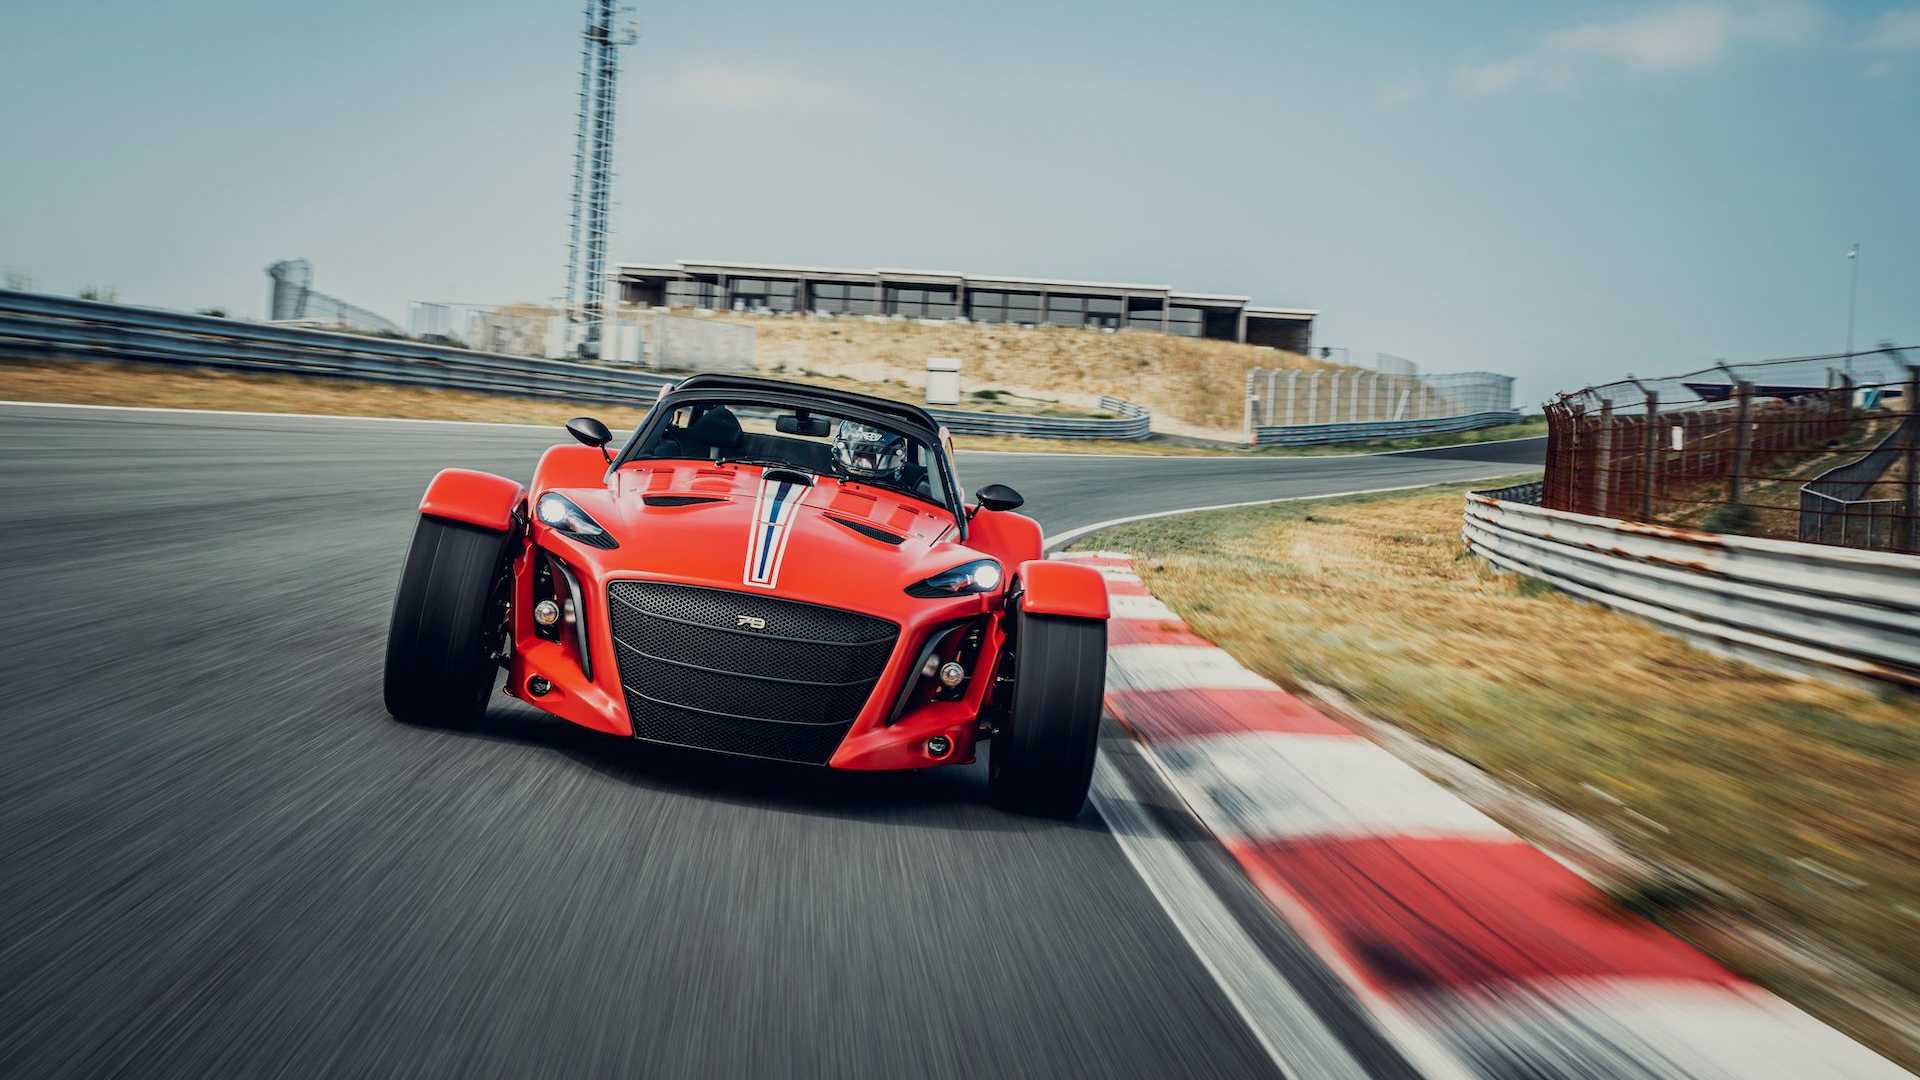 Donkervoort D8 Gto Jd70 R Is A Track Only Marvel That Loves Cornering Carscoops